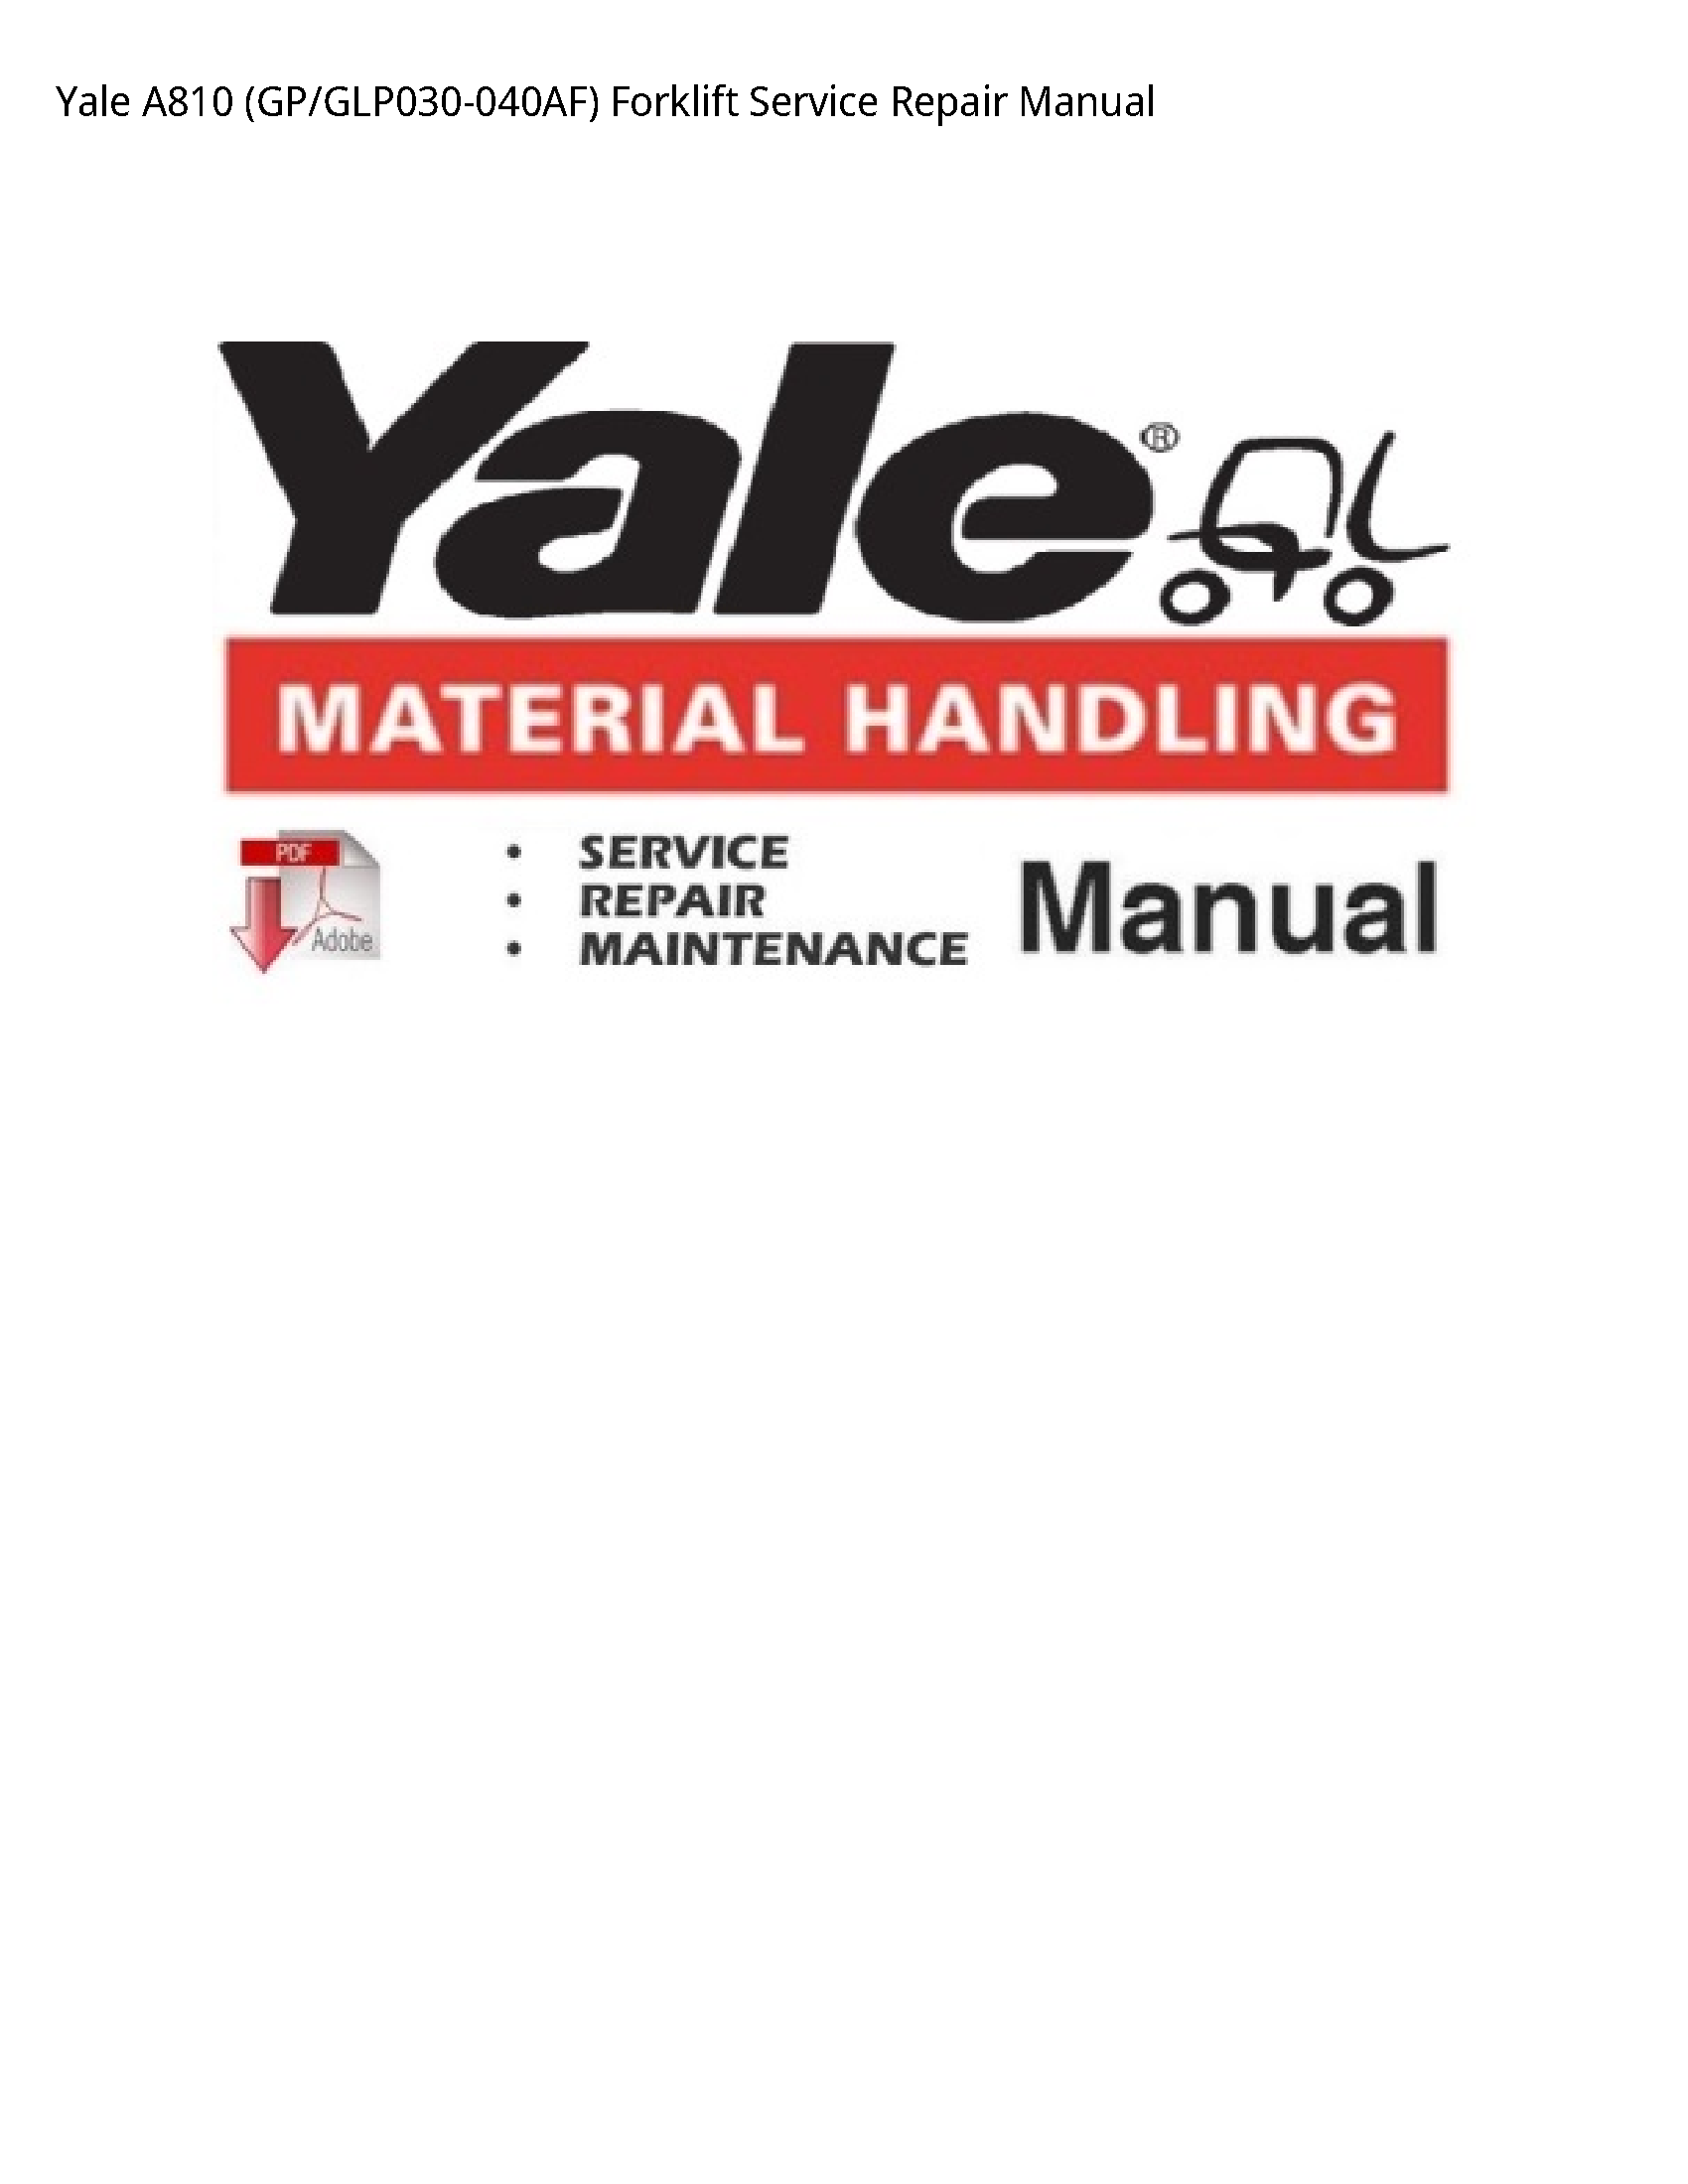 Yale A810 Forklift manual